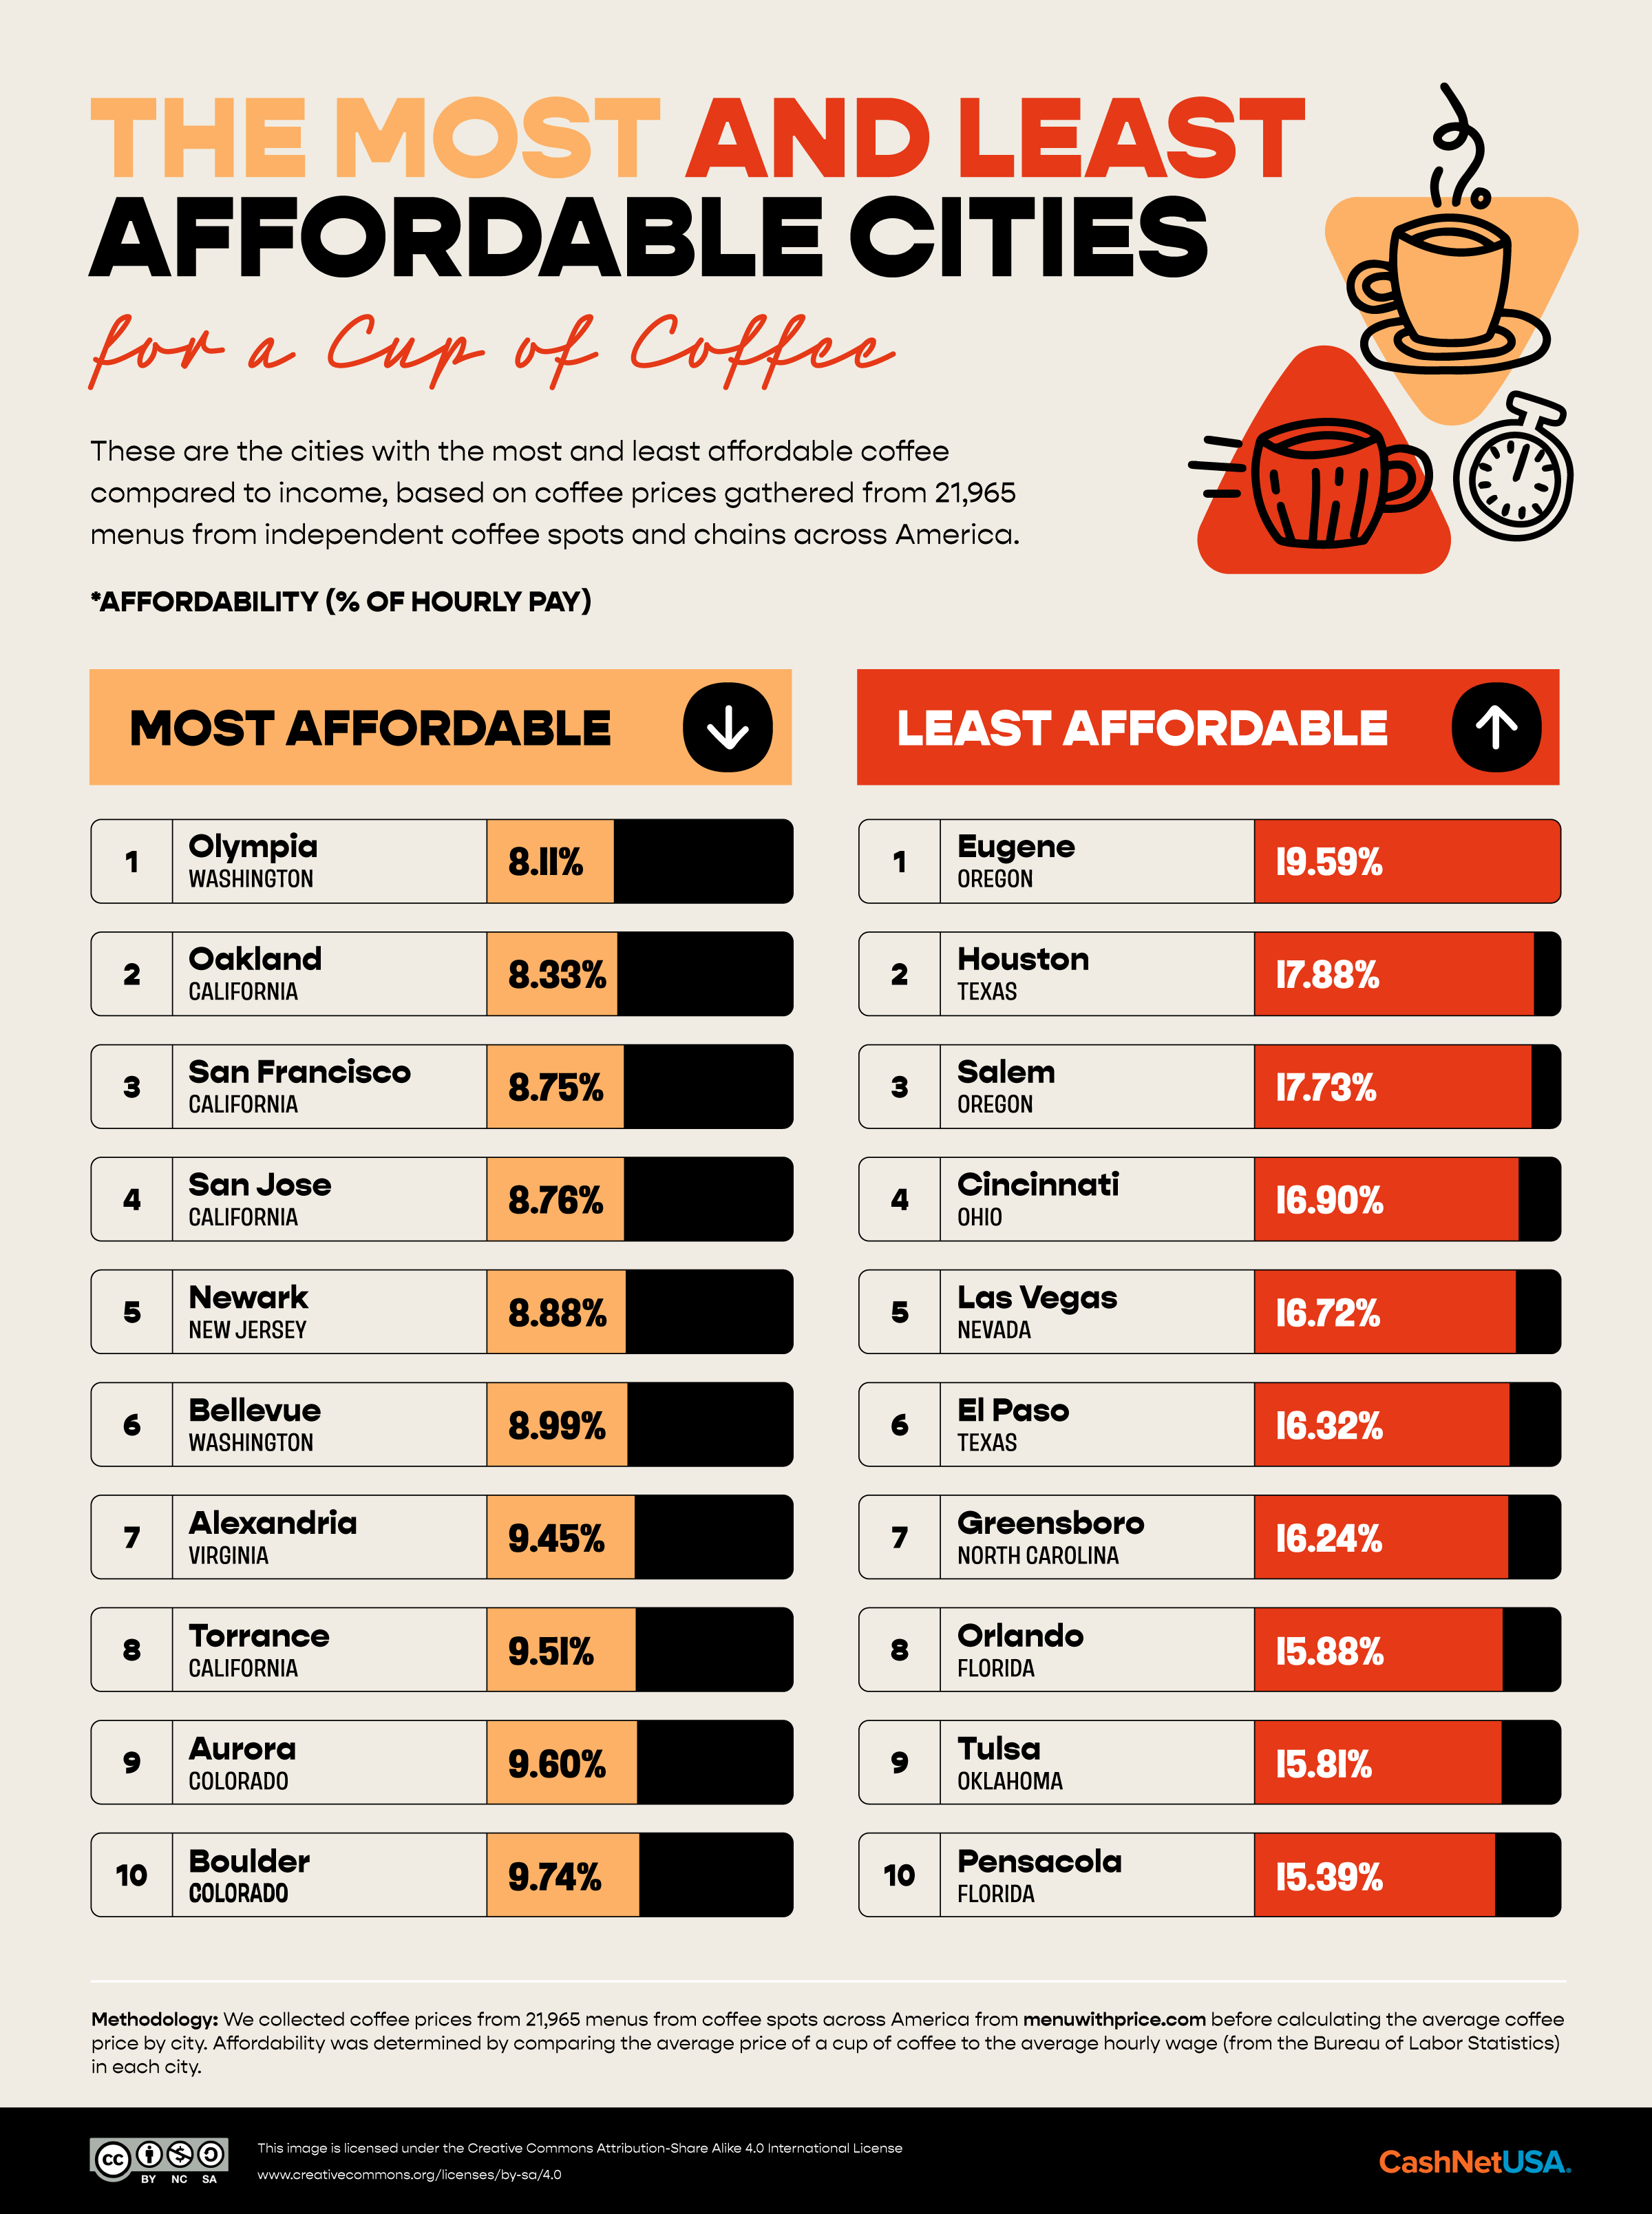 List showing the most and least affordable coffees compared to income by U.S. city